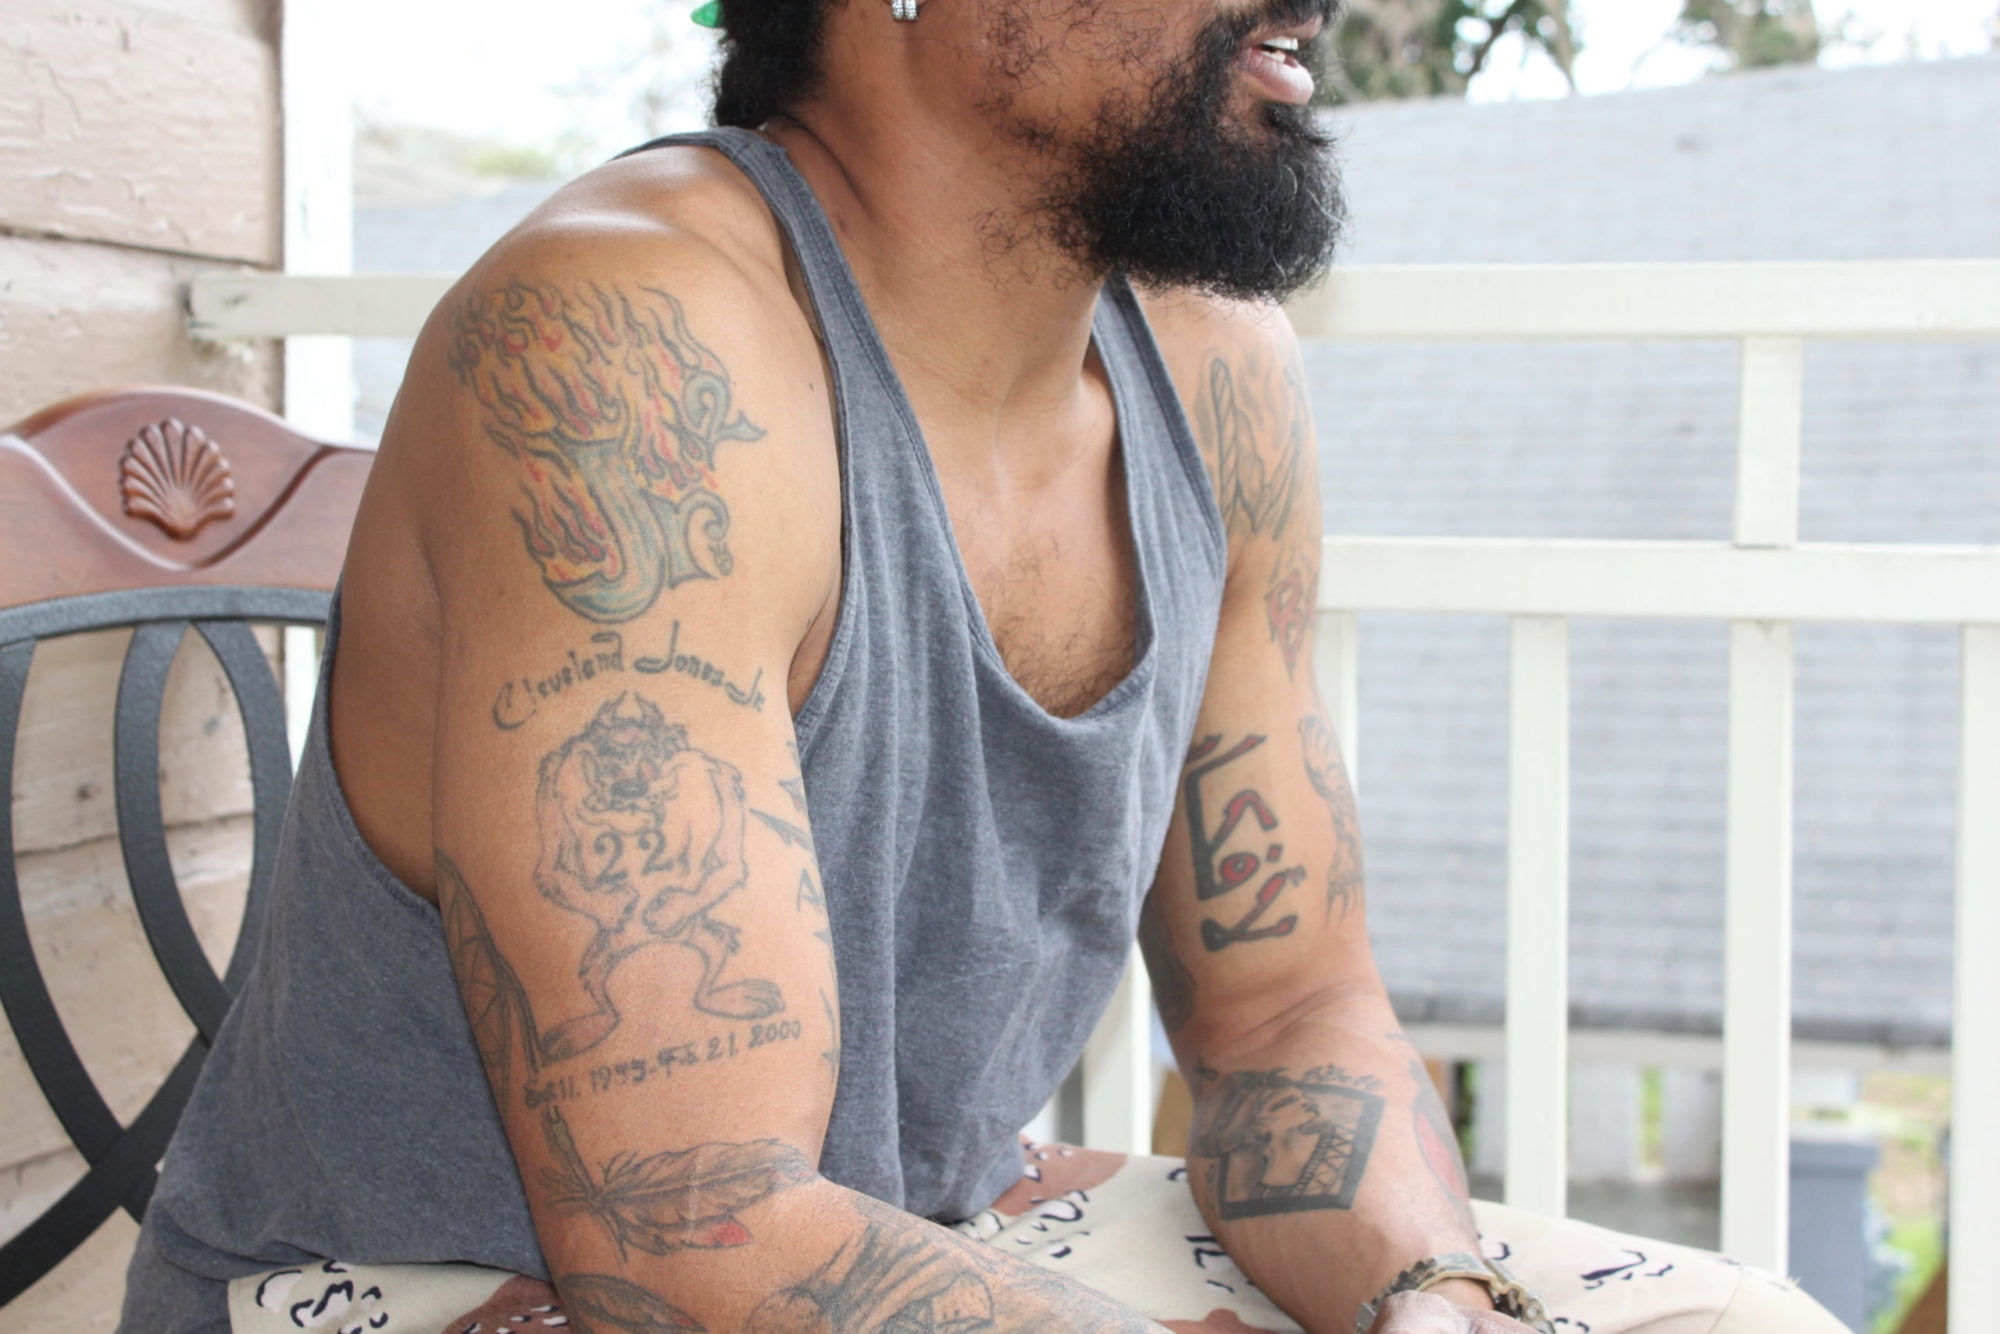 A closeup of a black person's torso as seen from the side shows two arms with tattoos. The person is wearing a light gray tanktop.